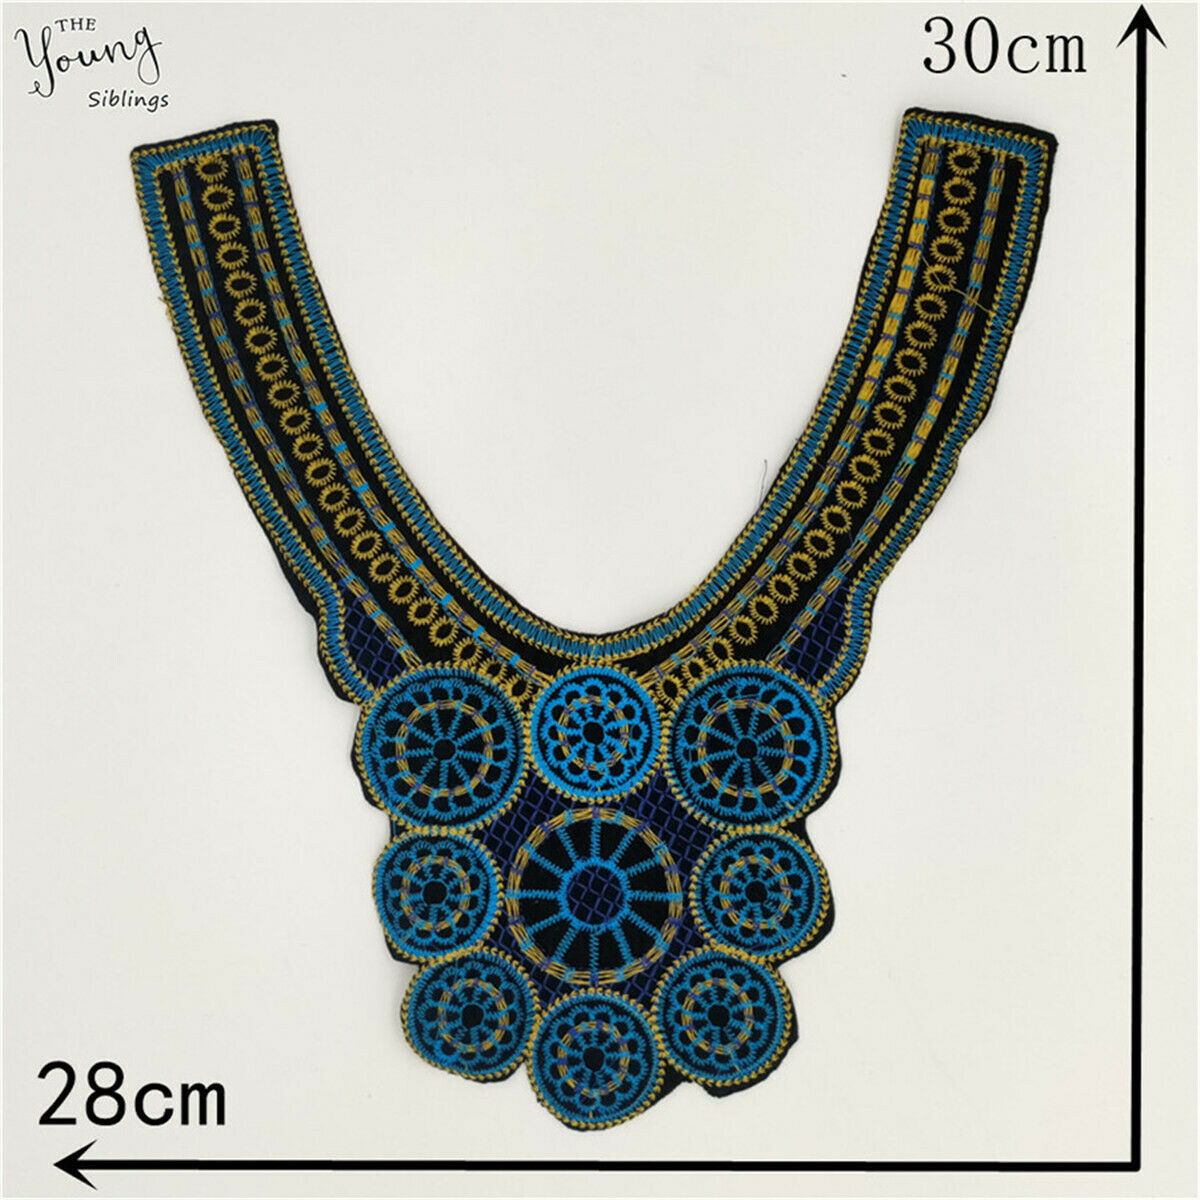 Embroidery Lace Collar Decor Sewing Patch Ethnic Style Applique Sew On Neckline